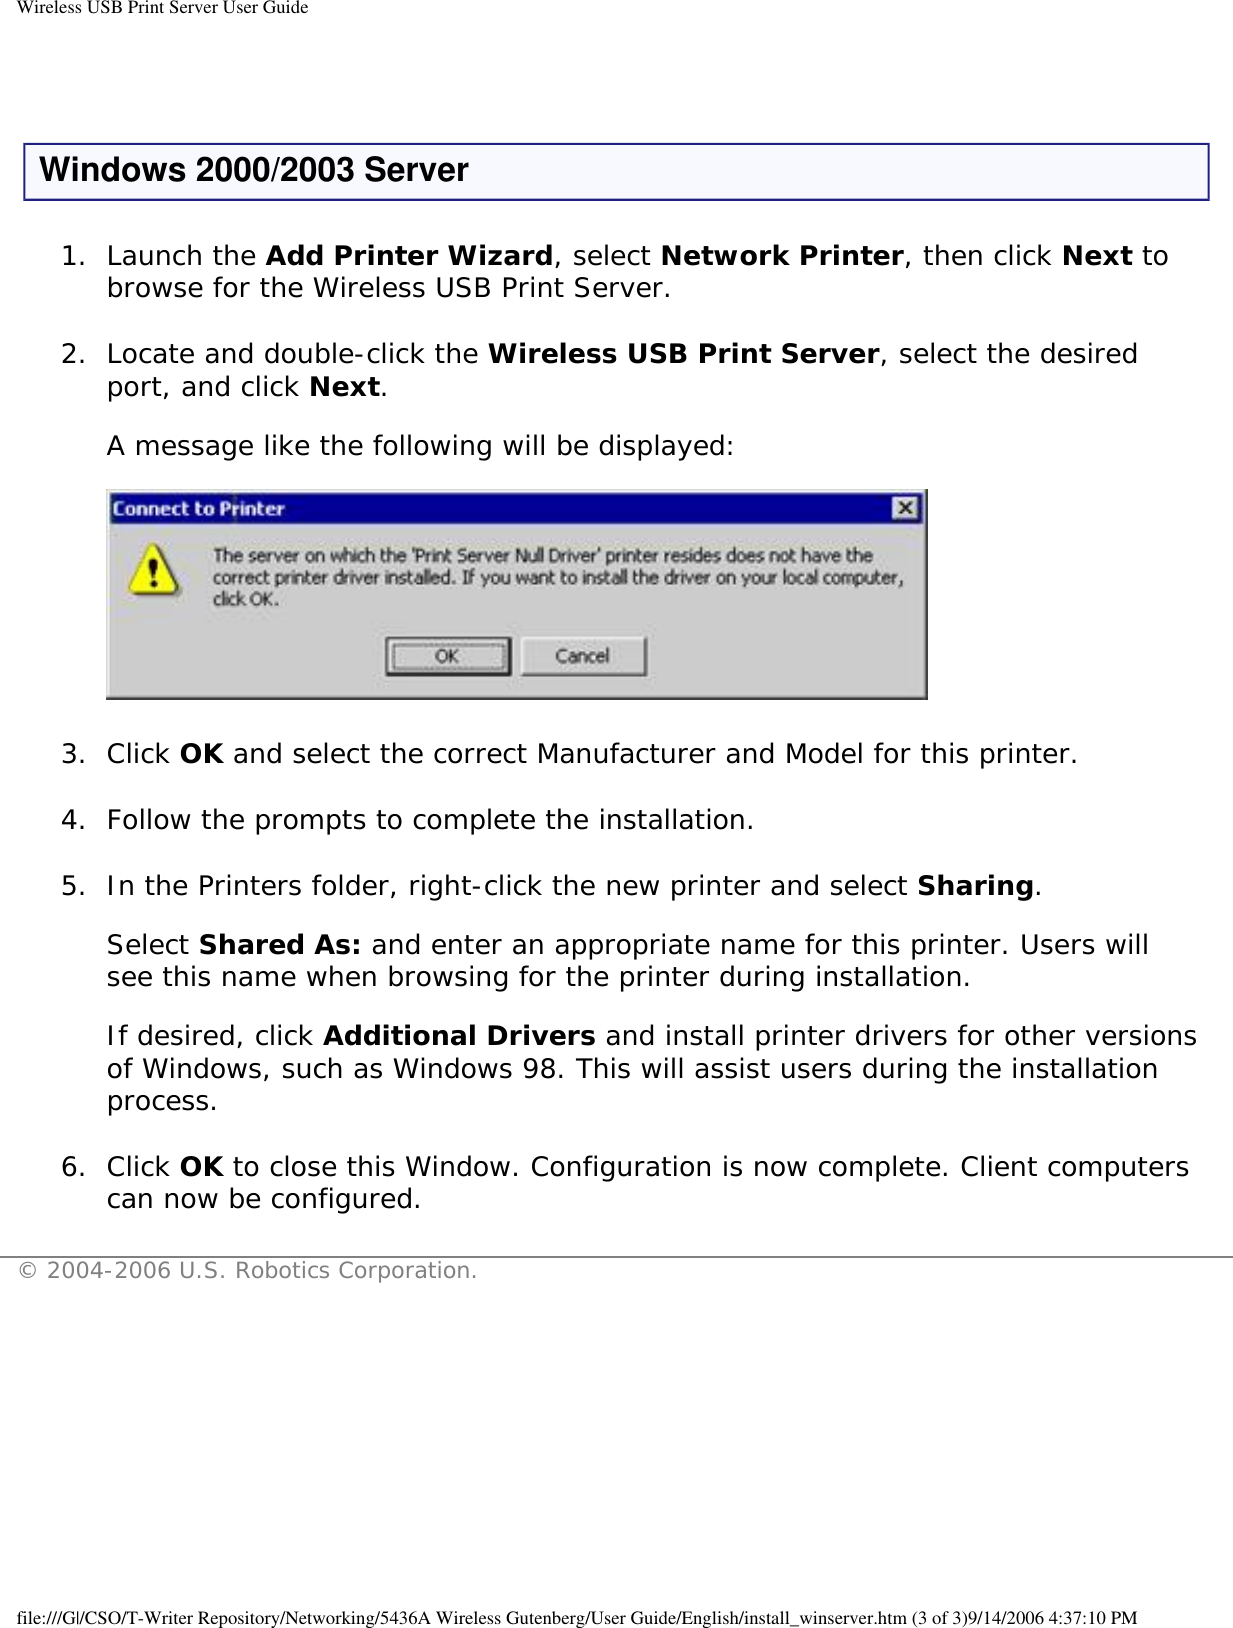 Wireless USB Print Server User Guide Windows 2000/2003 Server1.  Launch the Add Printer Wizard, select Network Printer, then click Next to browse for the Wireless USB Print Server. 2.  Locate and double-click the Wireless USB Print Server, select the desired port, and click Next.  A message like the following will be displayed:    3.  Click OK and select the correct Manufacturer and Model for this printer. 4.  Follow the prompts to complete the installation. 5.  In the Printers folder, right-click the new printer and select Sharing.  Select Shared As: and enter an appropriate name for this printer. Users will see this name when browsing for the printer during installation.  If desired, click Additional Drivers and install printer drivers for other versions of Windows, such as Windows 98. This will assist users during the installation process. 6.  Click OK to close this Window. Configuration is now complete. Client computers can now be configured. © 2004-2006 U.S. Robotics Corporation.file:///G|/CSO/T-Writer Repository/Networking/5436A Wireless Gutenberg/User Guide/English/install_winserver.htm (3 of 3)9/14/2006 4:37:10 PM